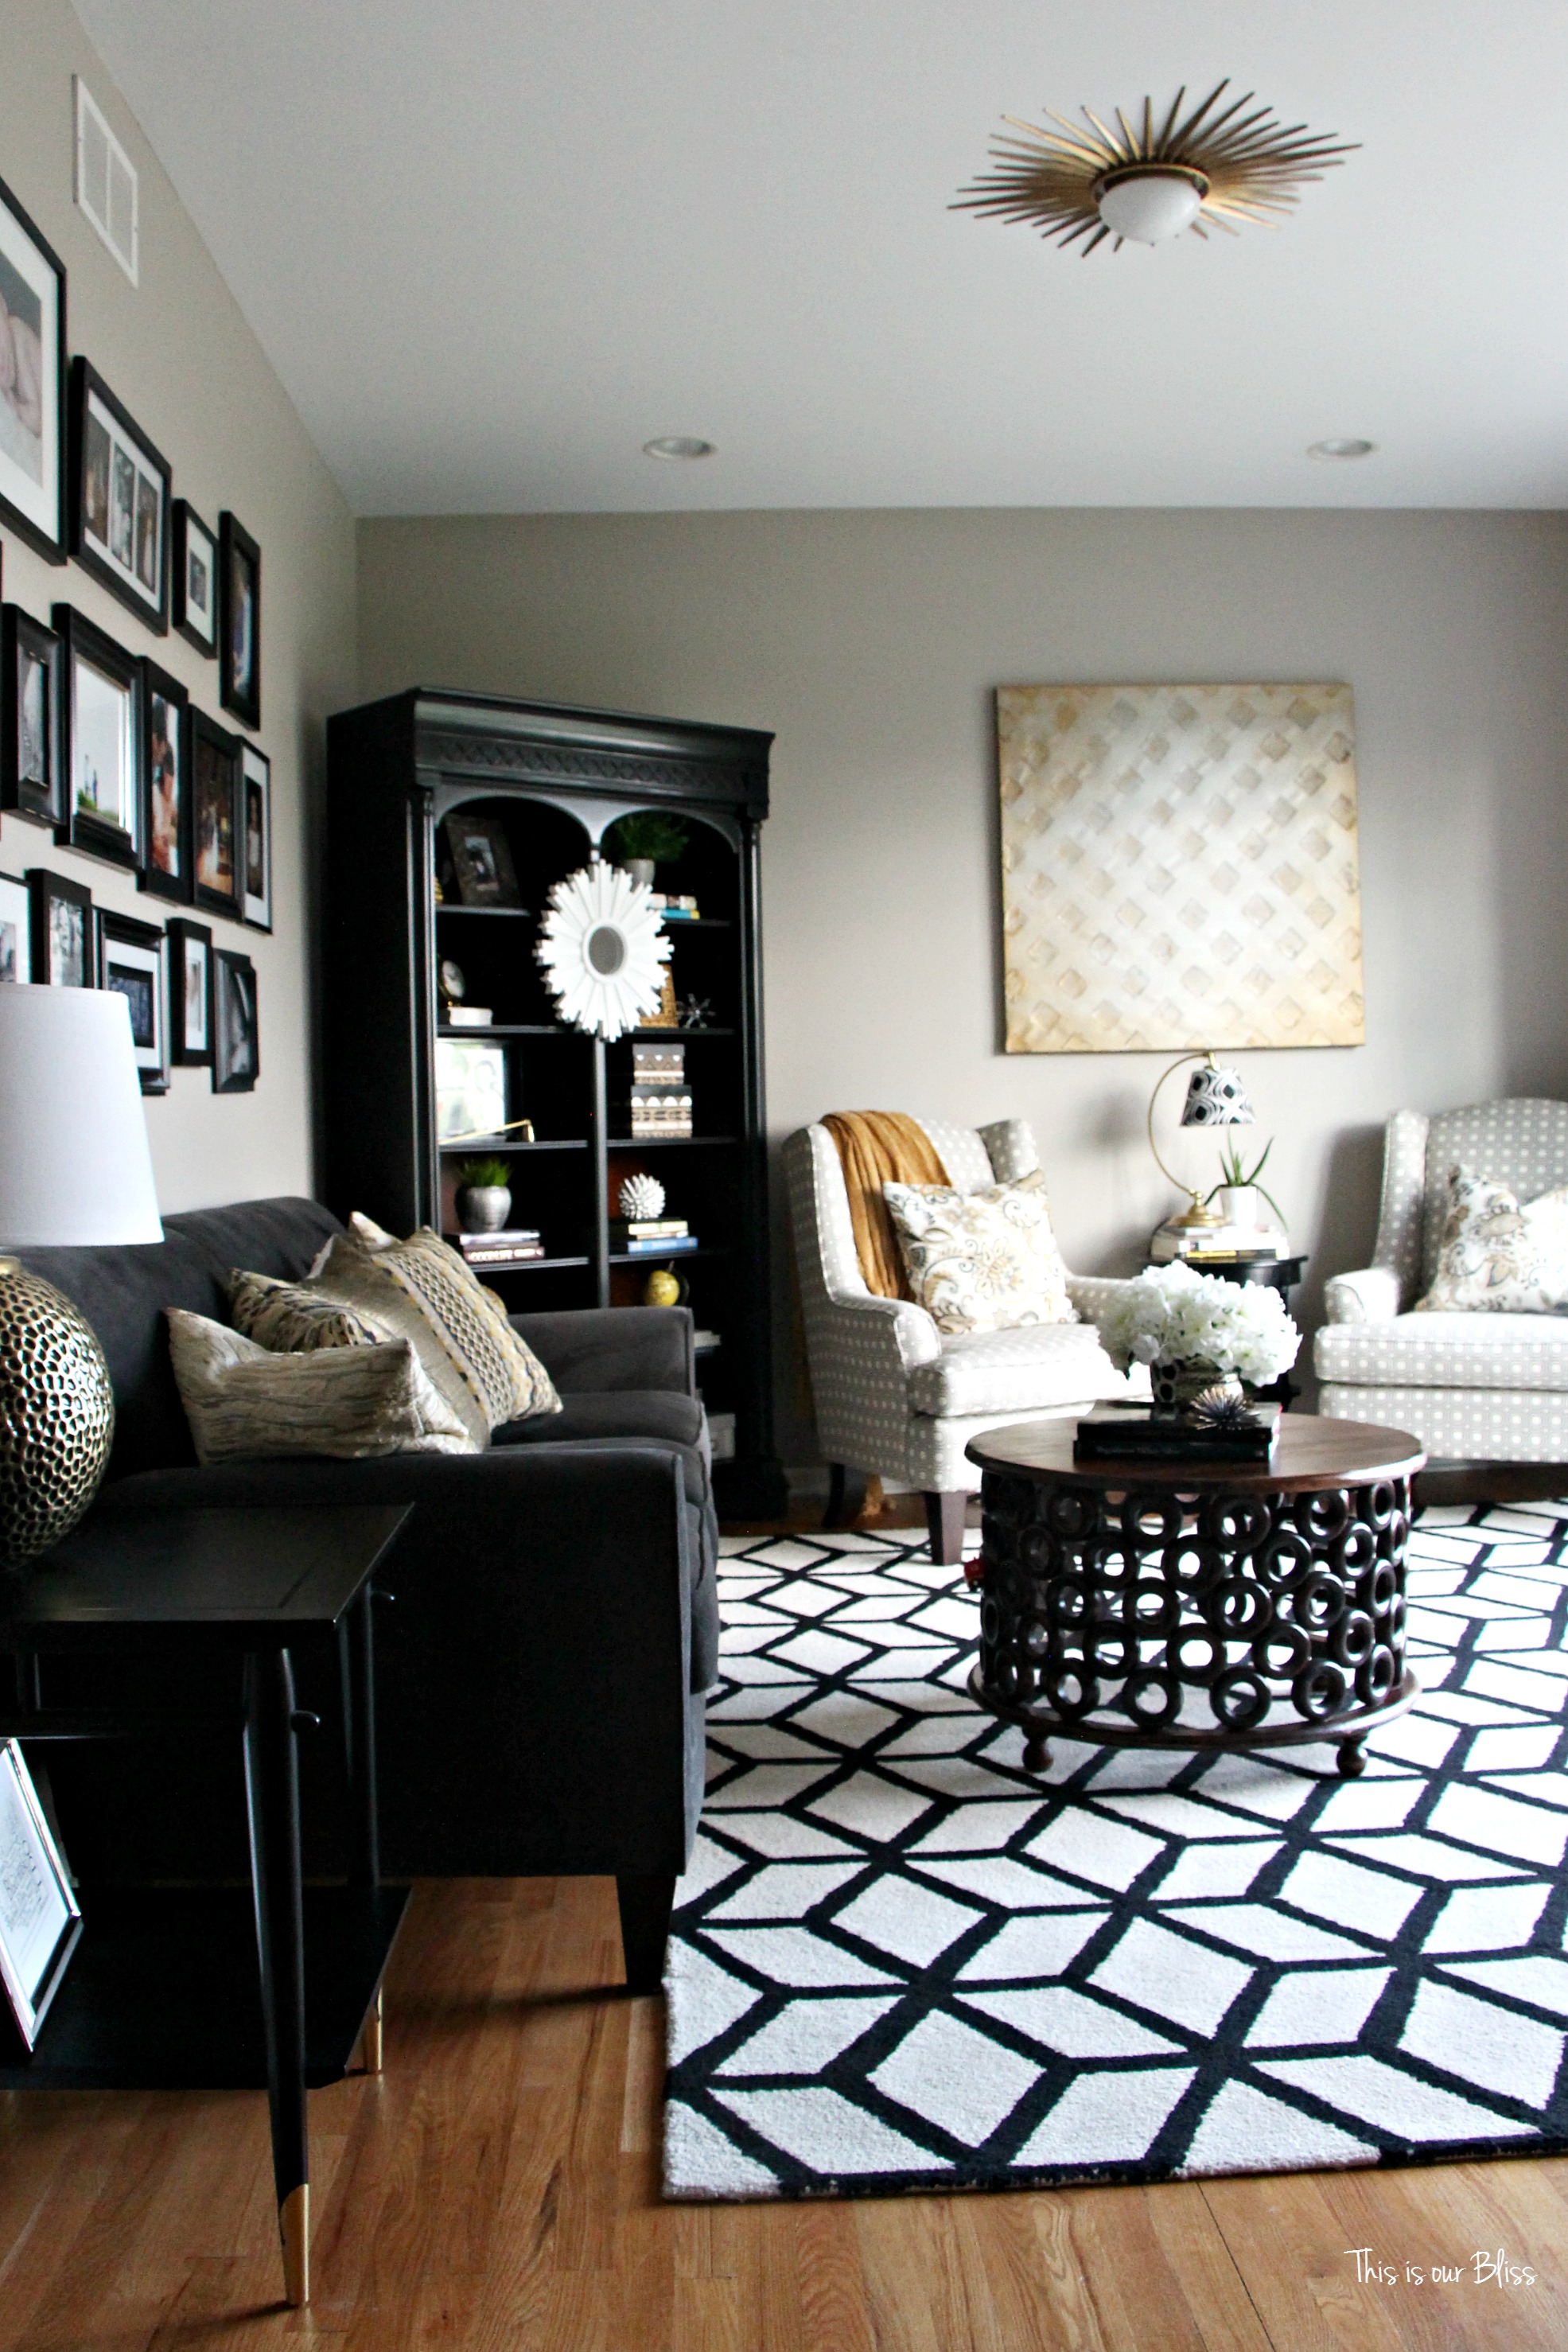 black and white rug decor the simple answer has always been homegoods! but since they carry limited KRSYAUA